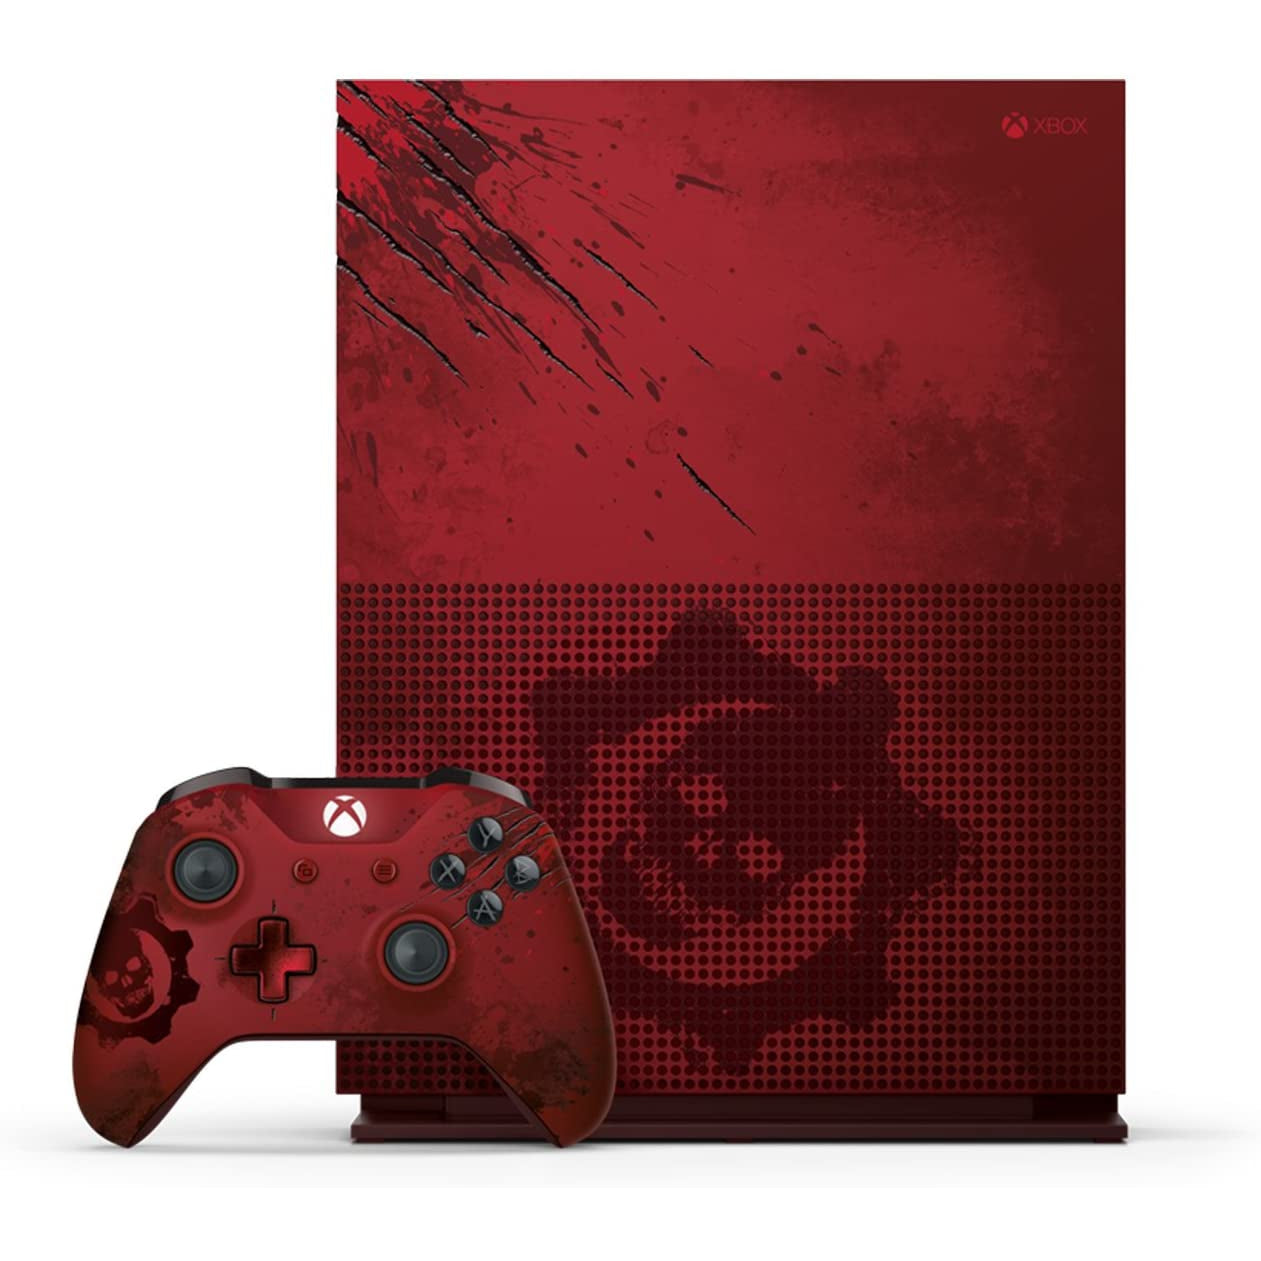 Xbox One S Gears of War 4 Limited Edition Console (2TB)